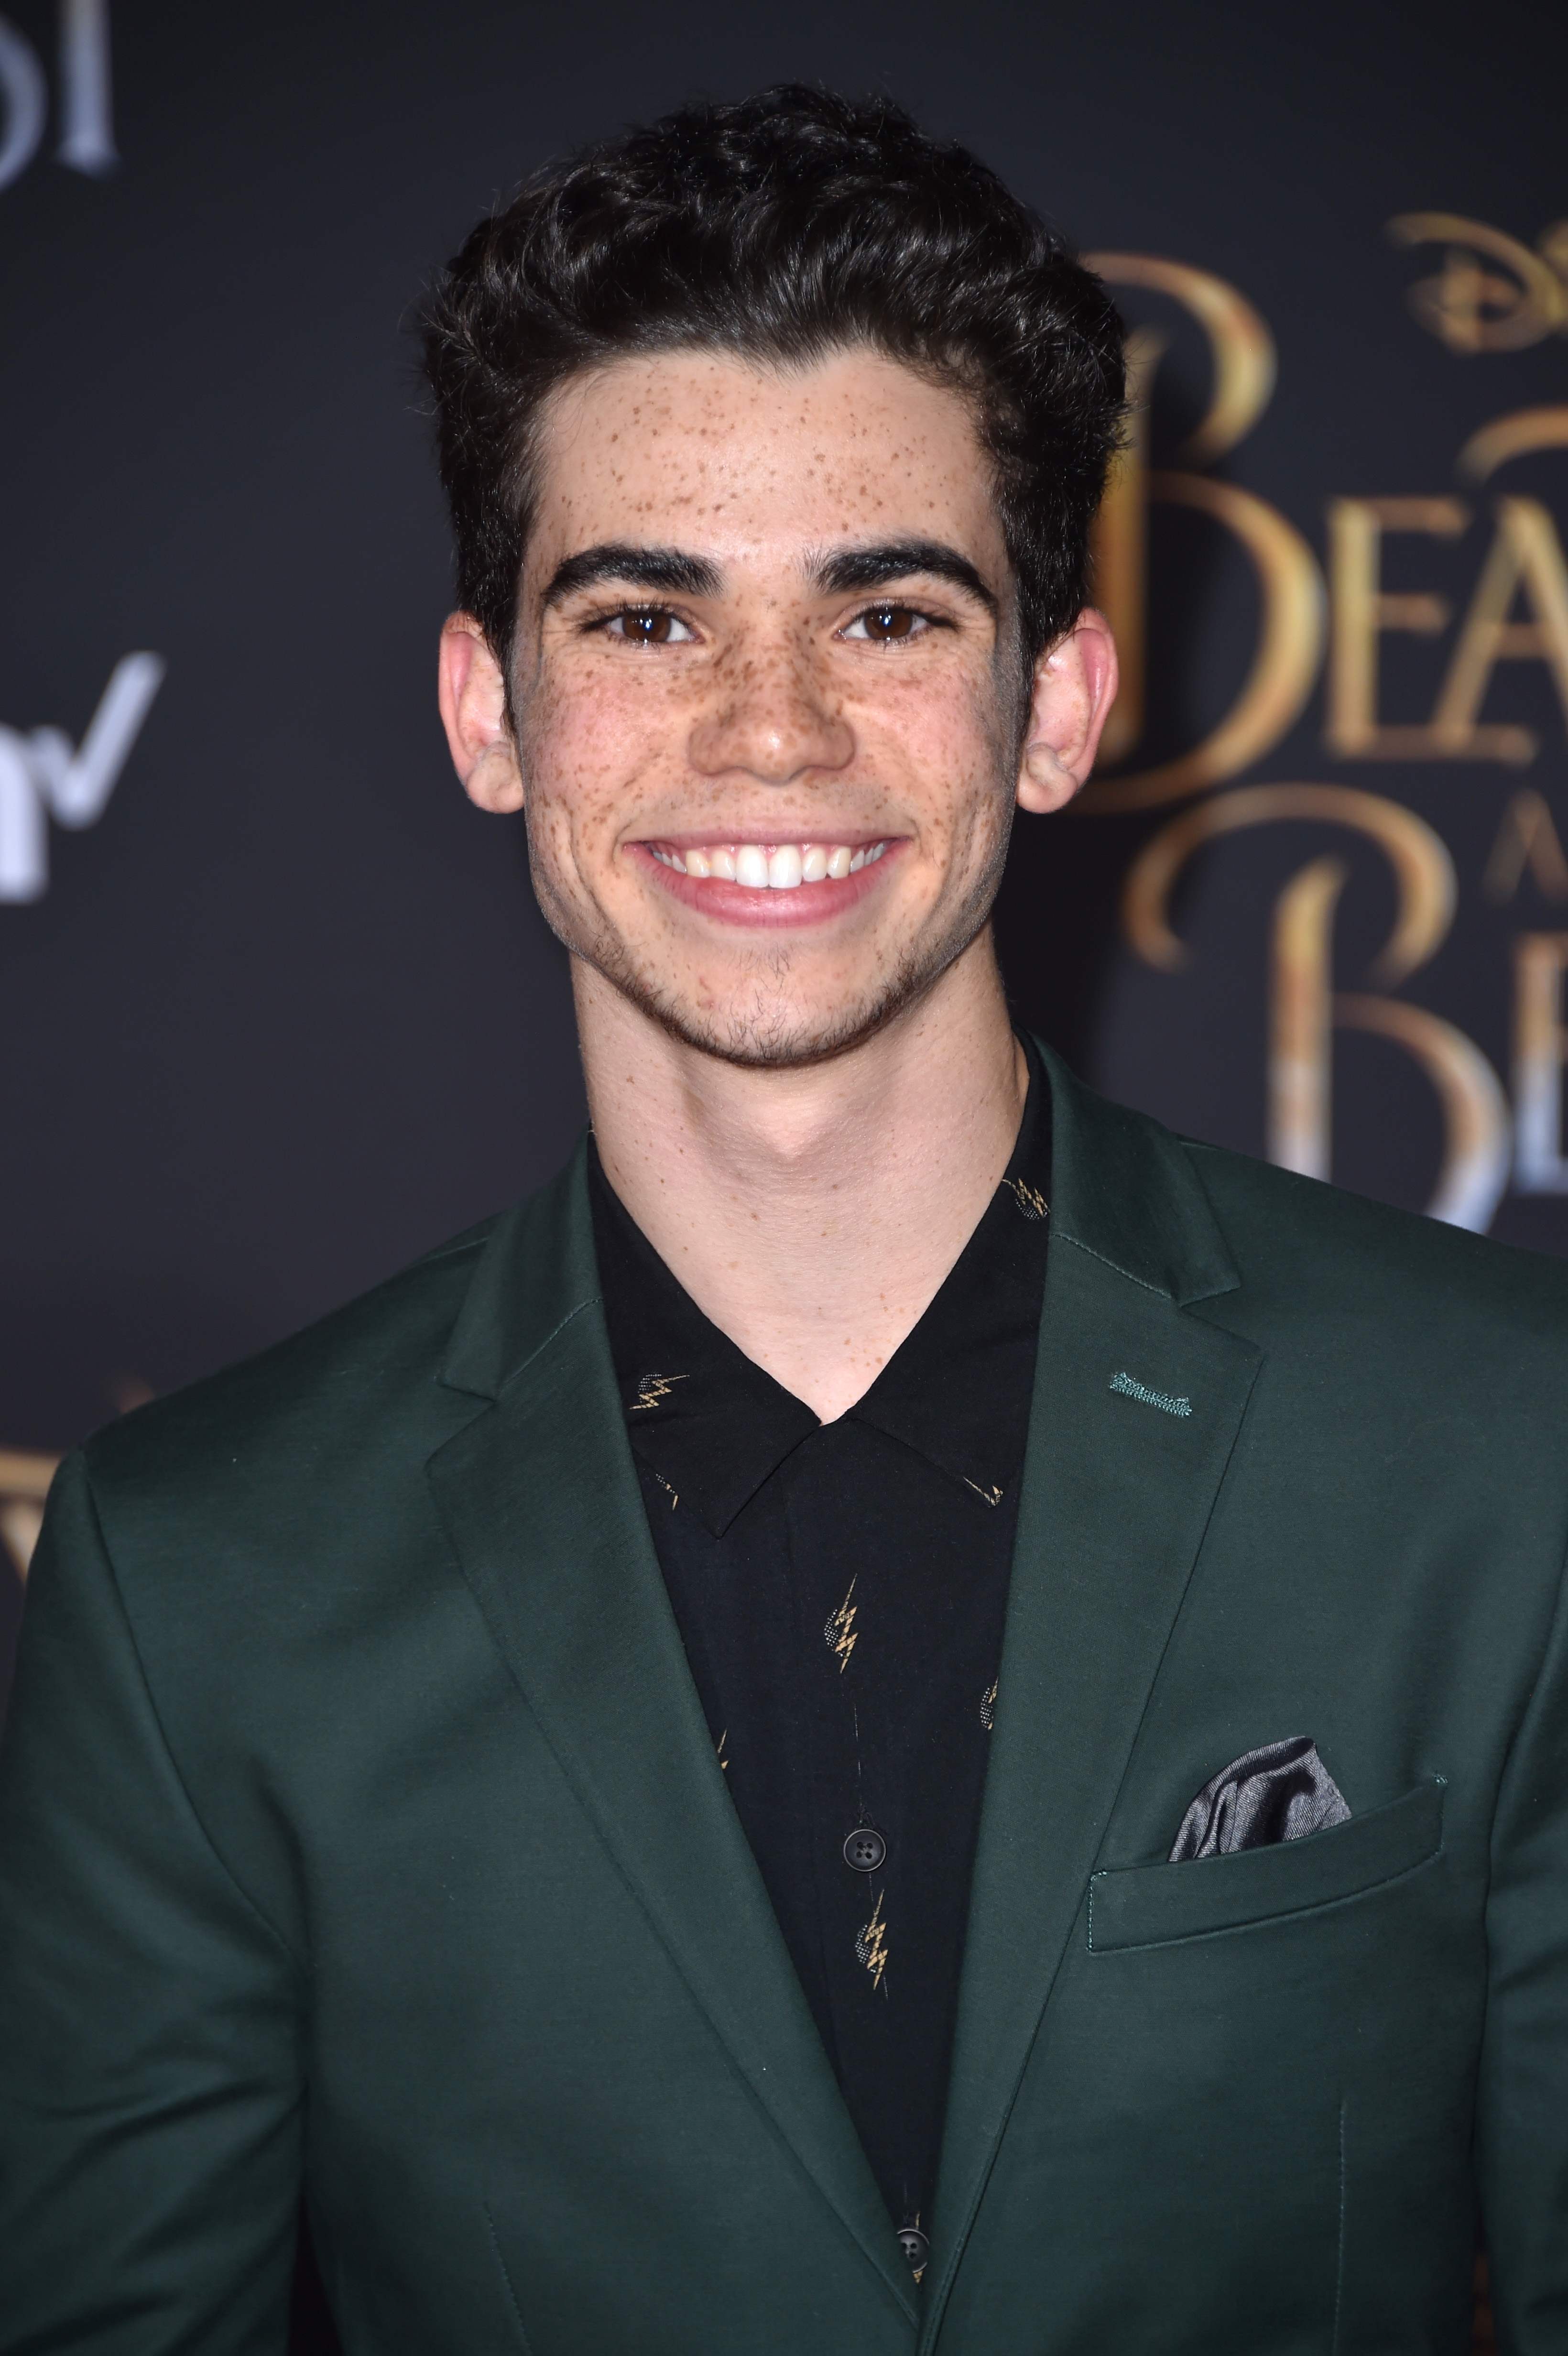 Cameron Boyce poses at Disney's "Beauty and the Beast" premiere at El Capitan Theatre on March 2, 2017, in Los Angeles, California | Source: Getty Images